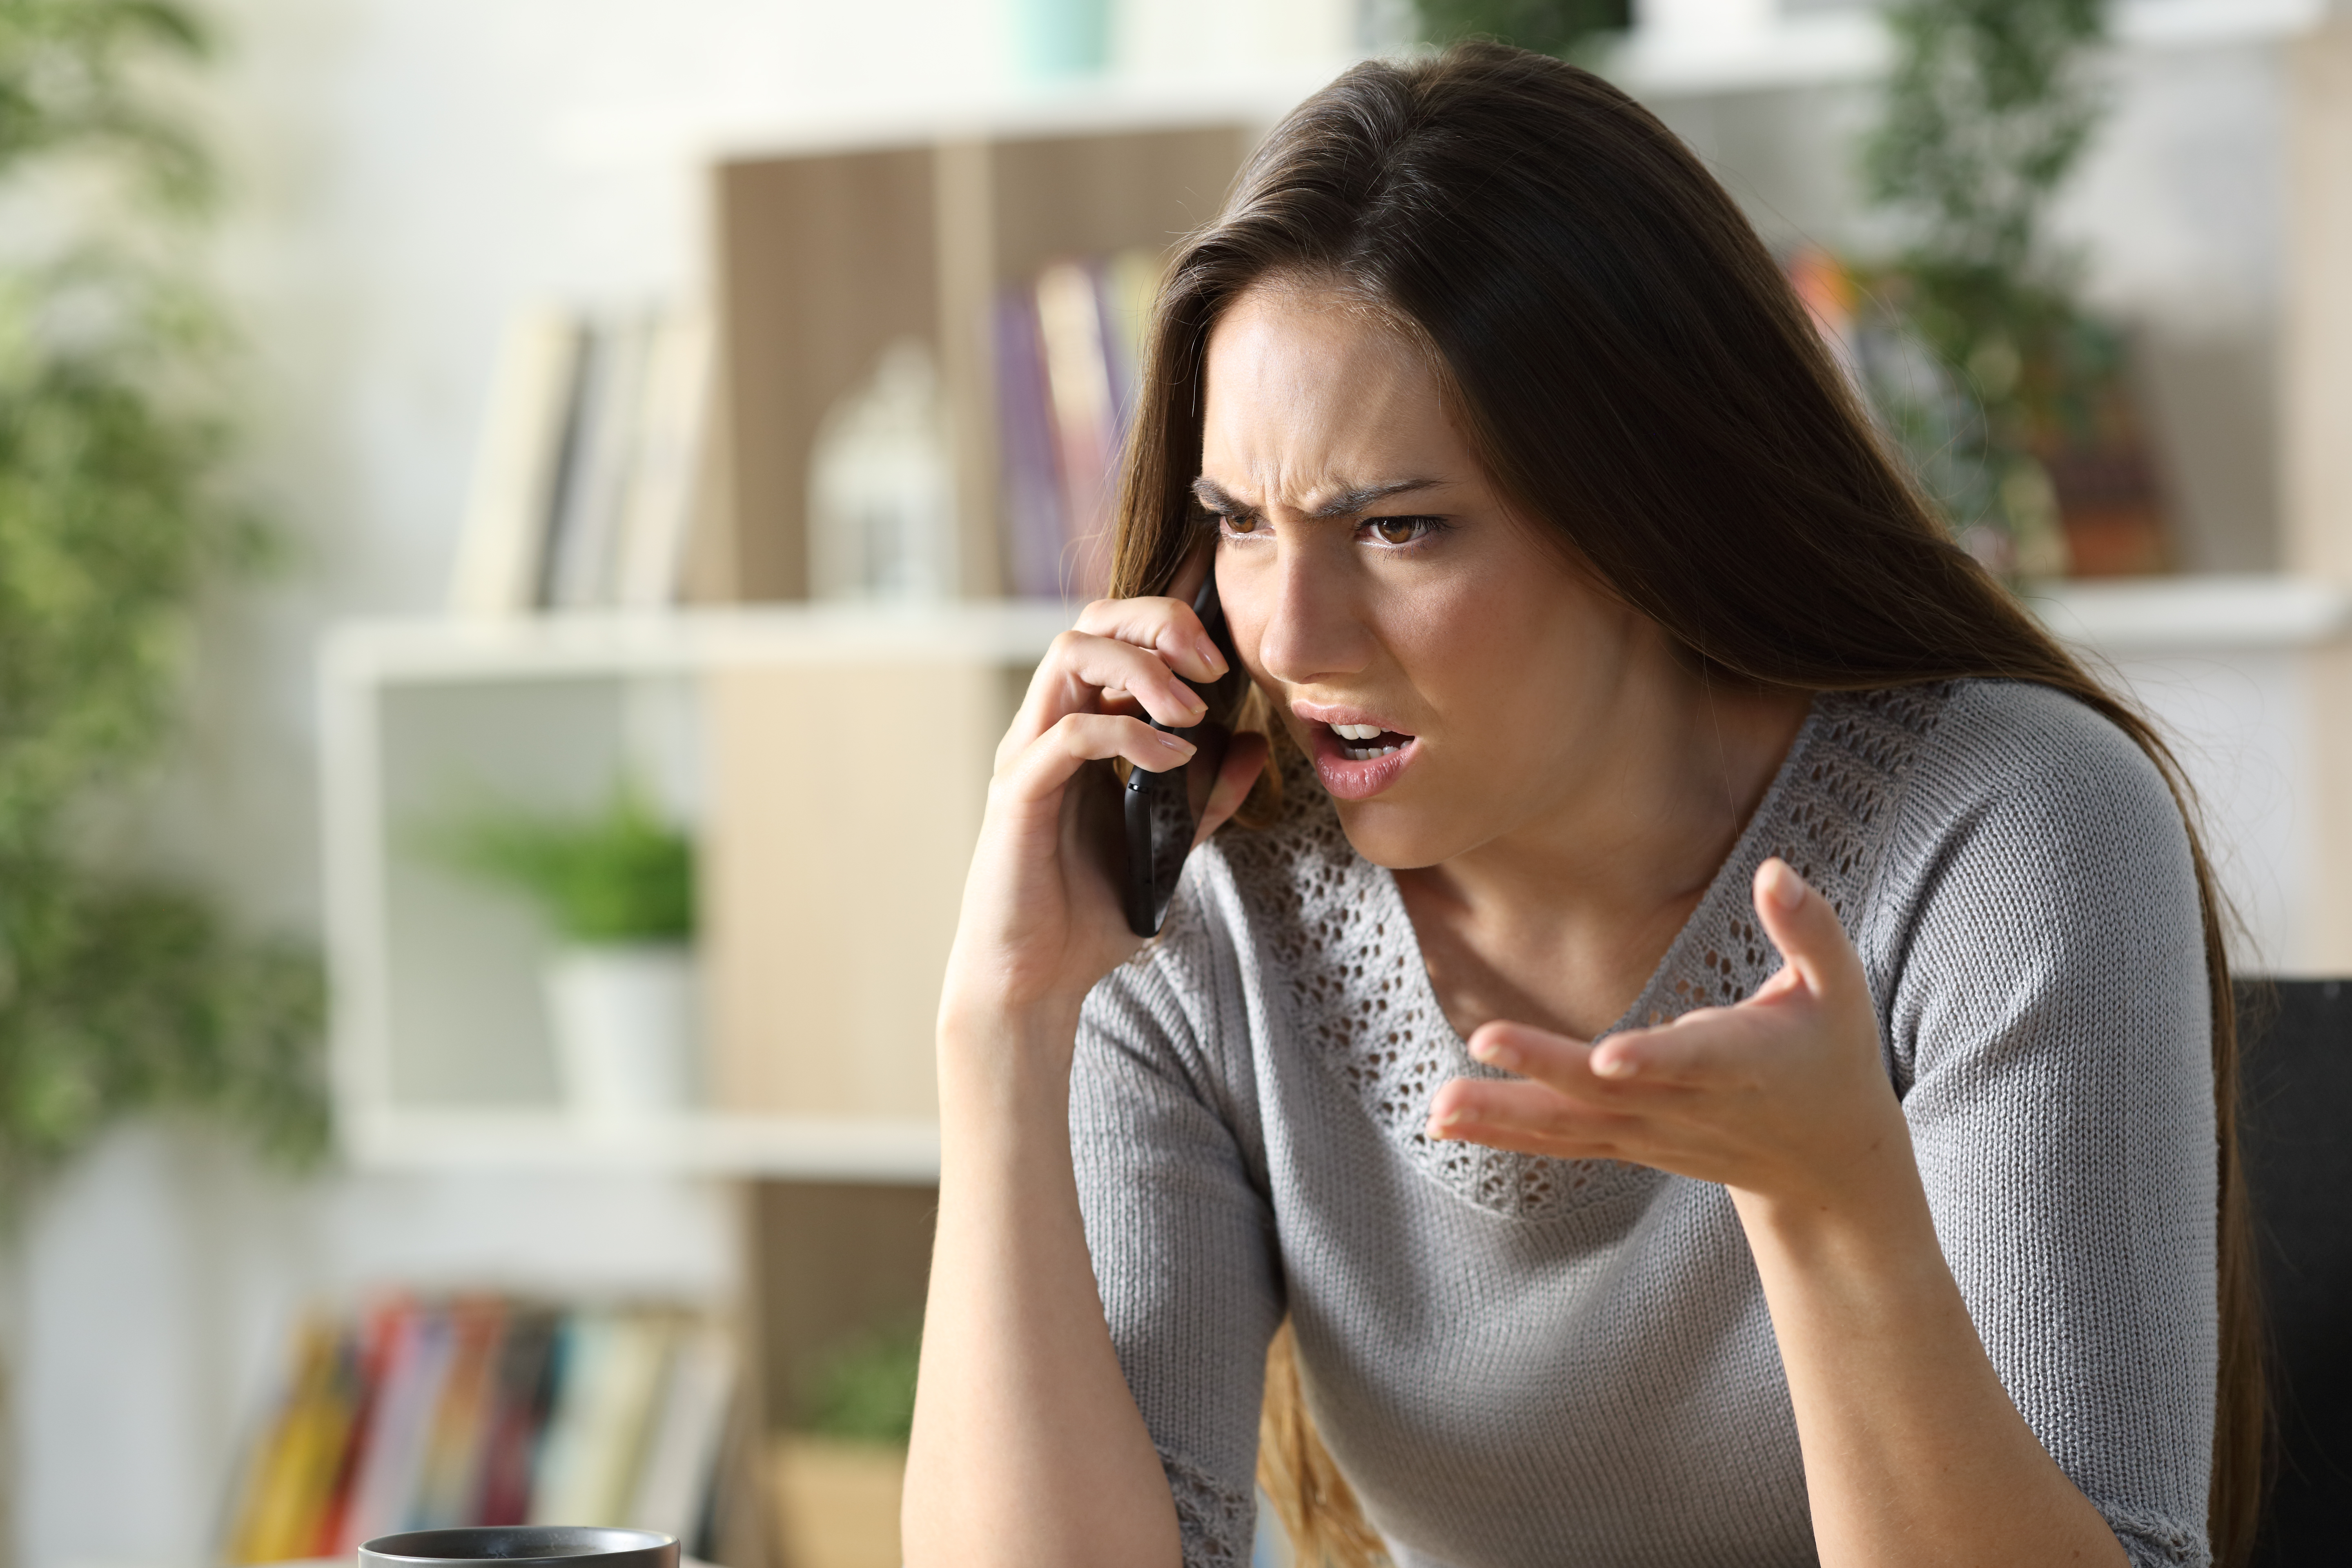 Angry woman arguing on phone at home | Source: Getty Images